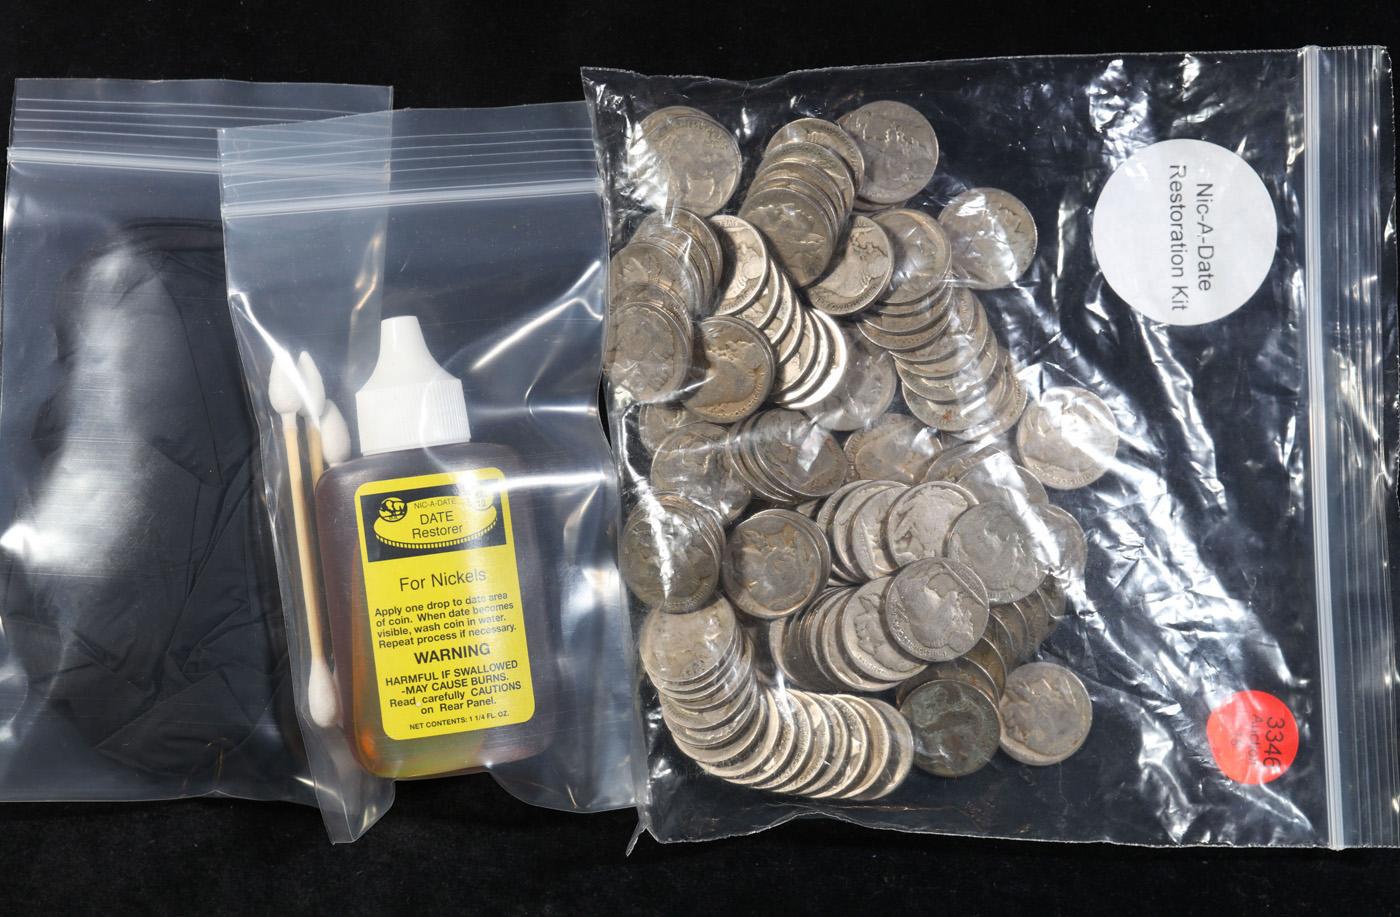 Introducing the Nic-A-Date Coin Kit Fun for the whole family!